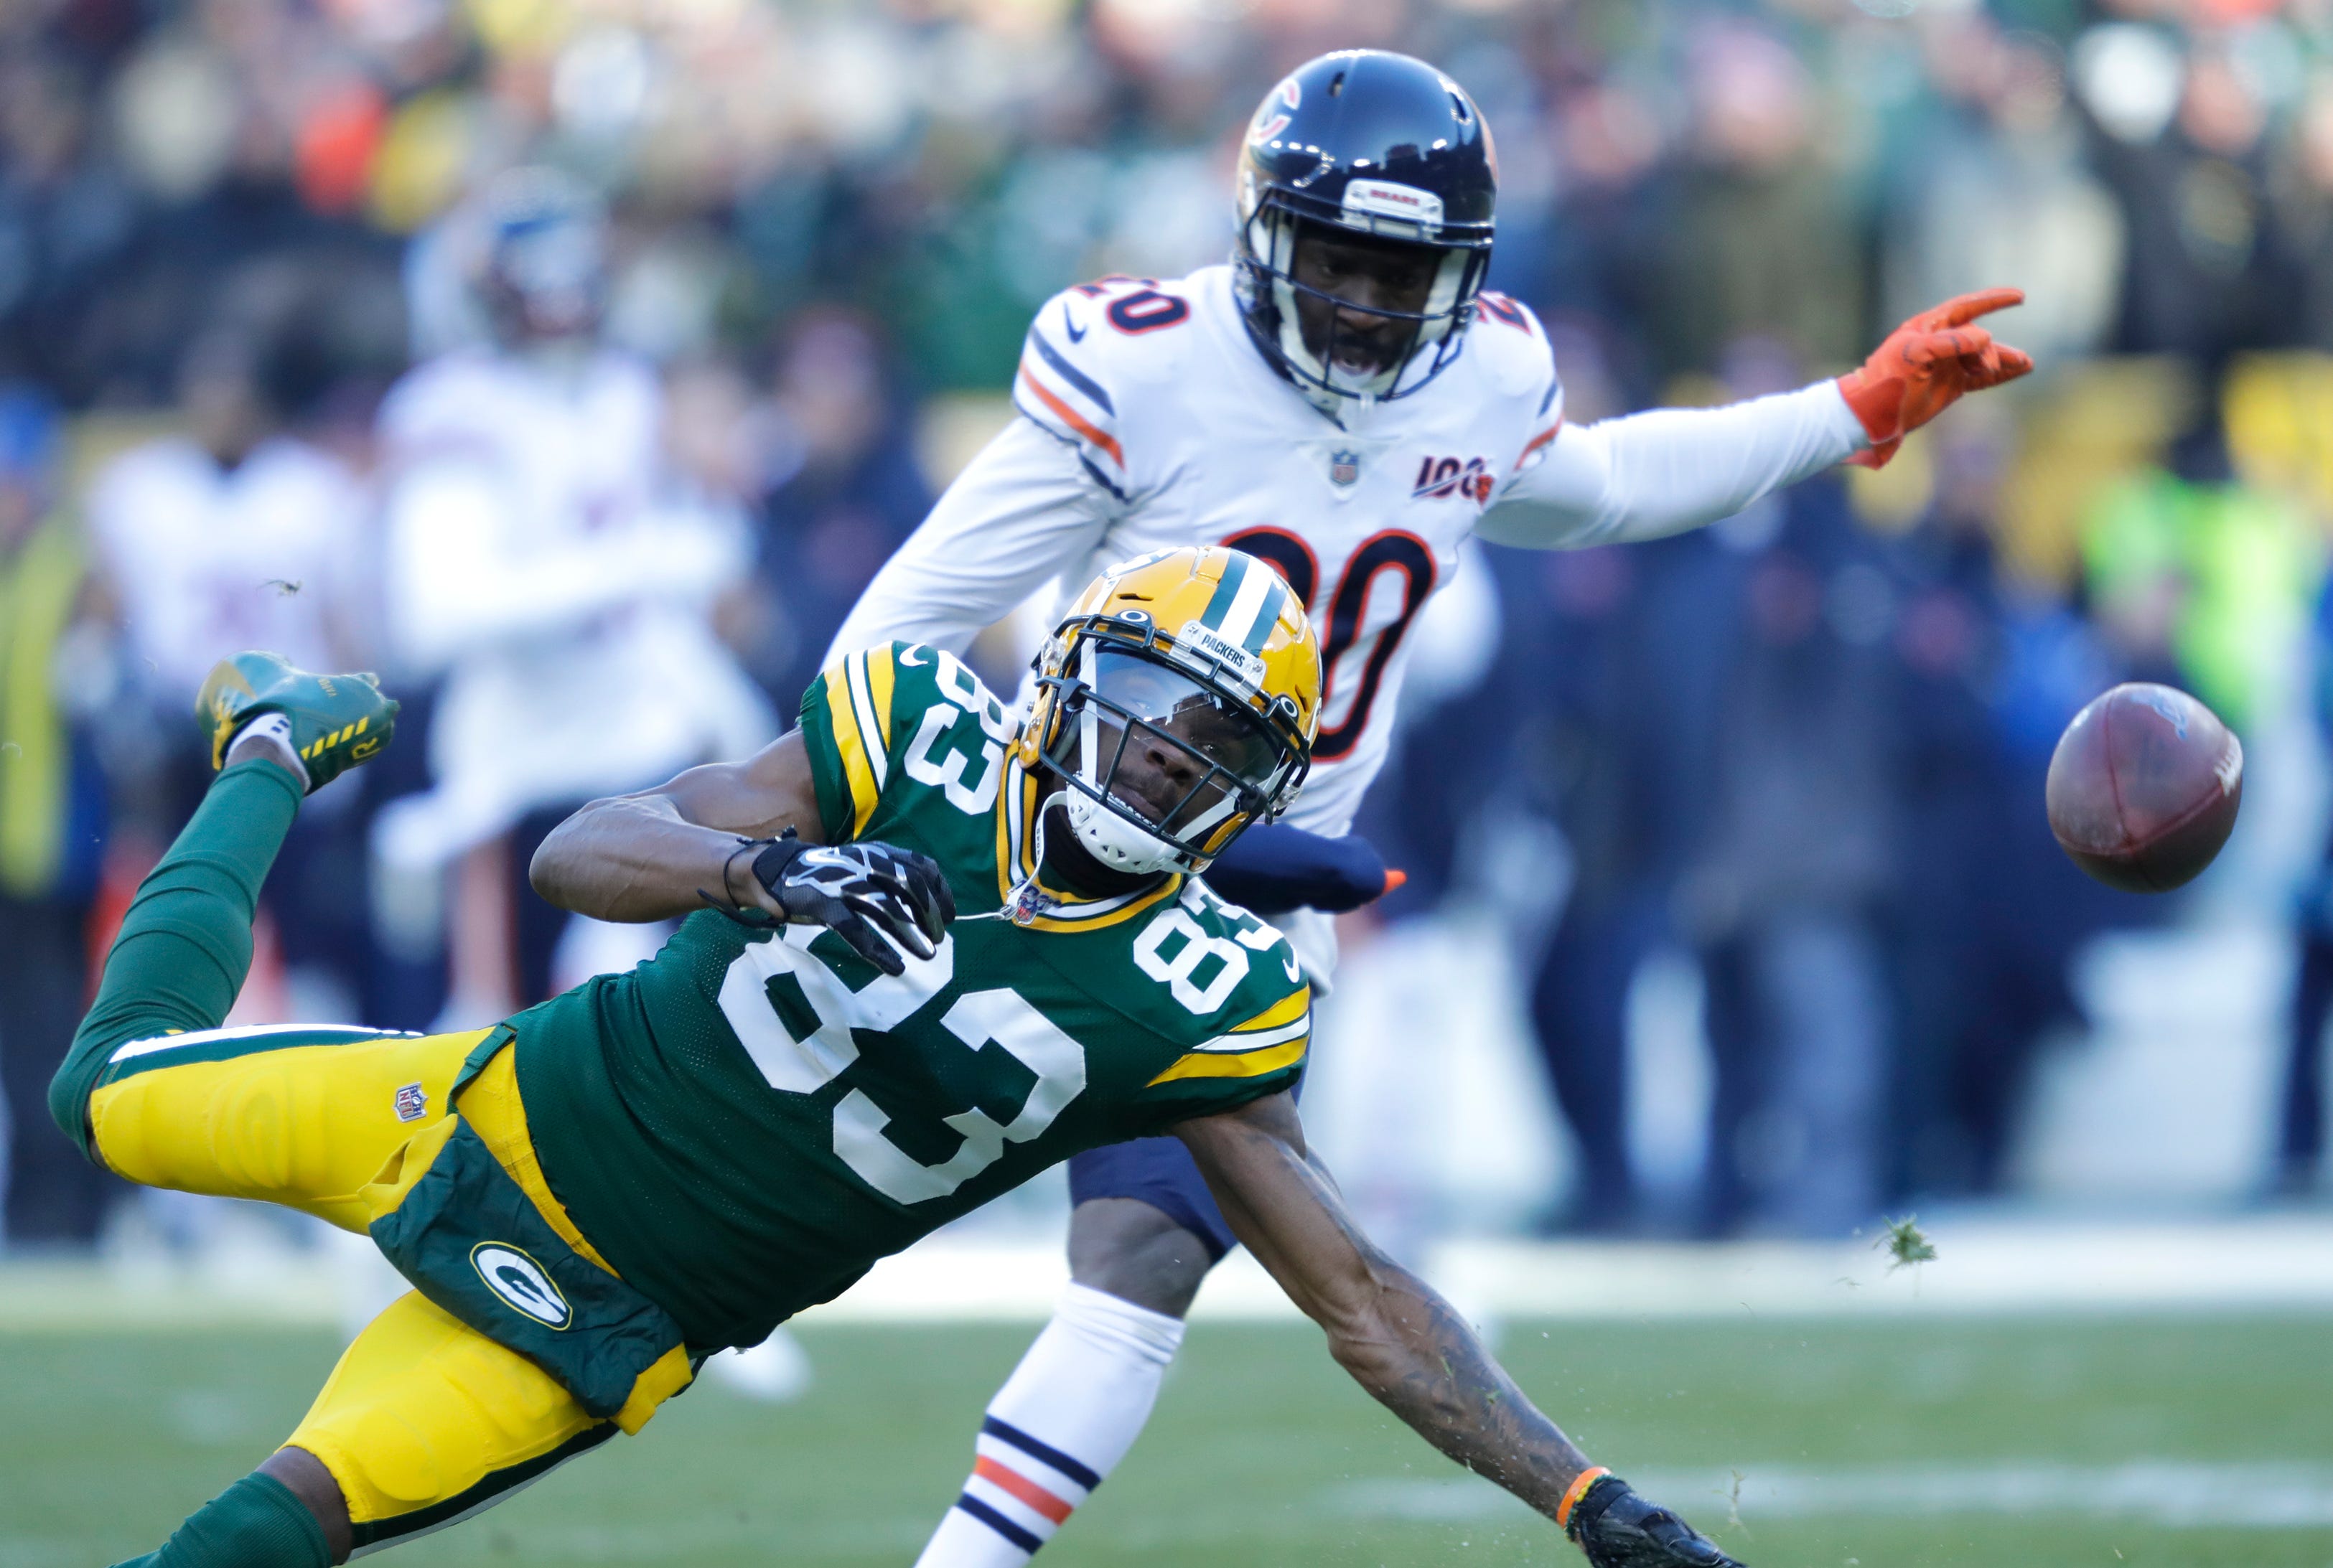 Green Bay Packers wide receiver Marquez Valdes-Scantling (83) drops a pass in the first quarter as he is covered by Chicago Bears cornerback Prince Amukamara (20) Sunday, December 15, 2019, at Lambeau Field in Green Bay, Wis.